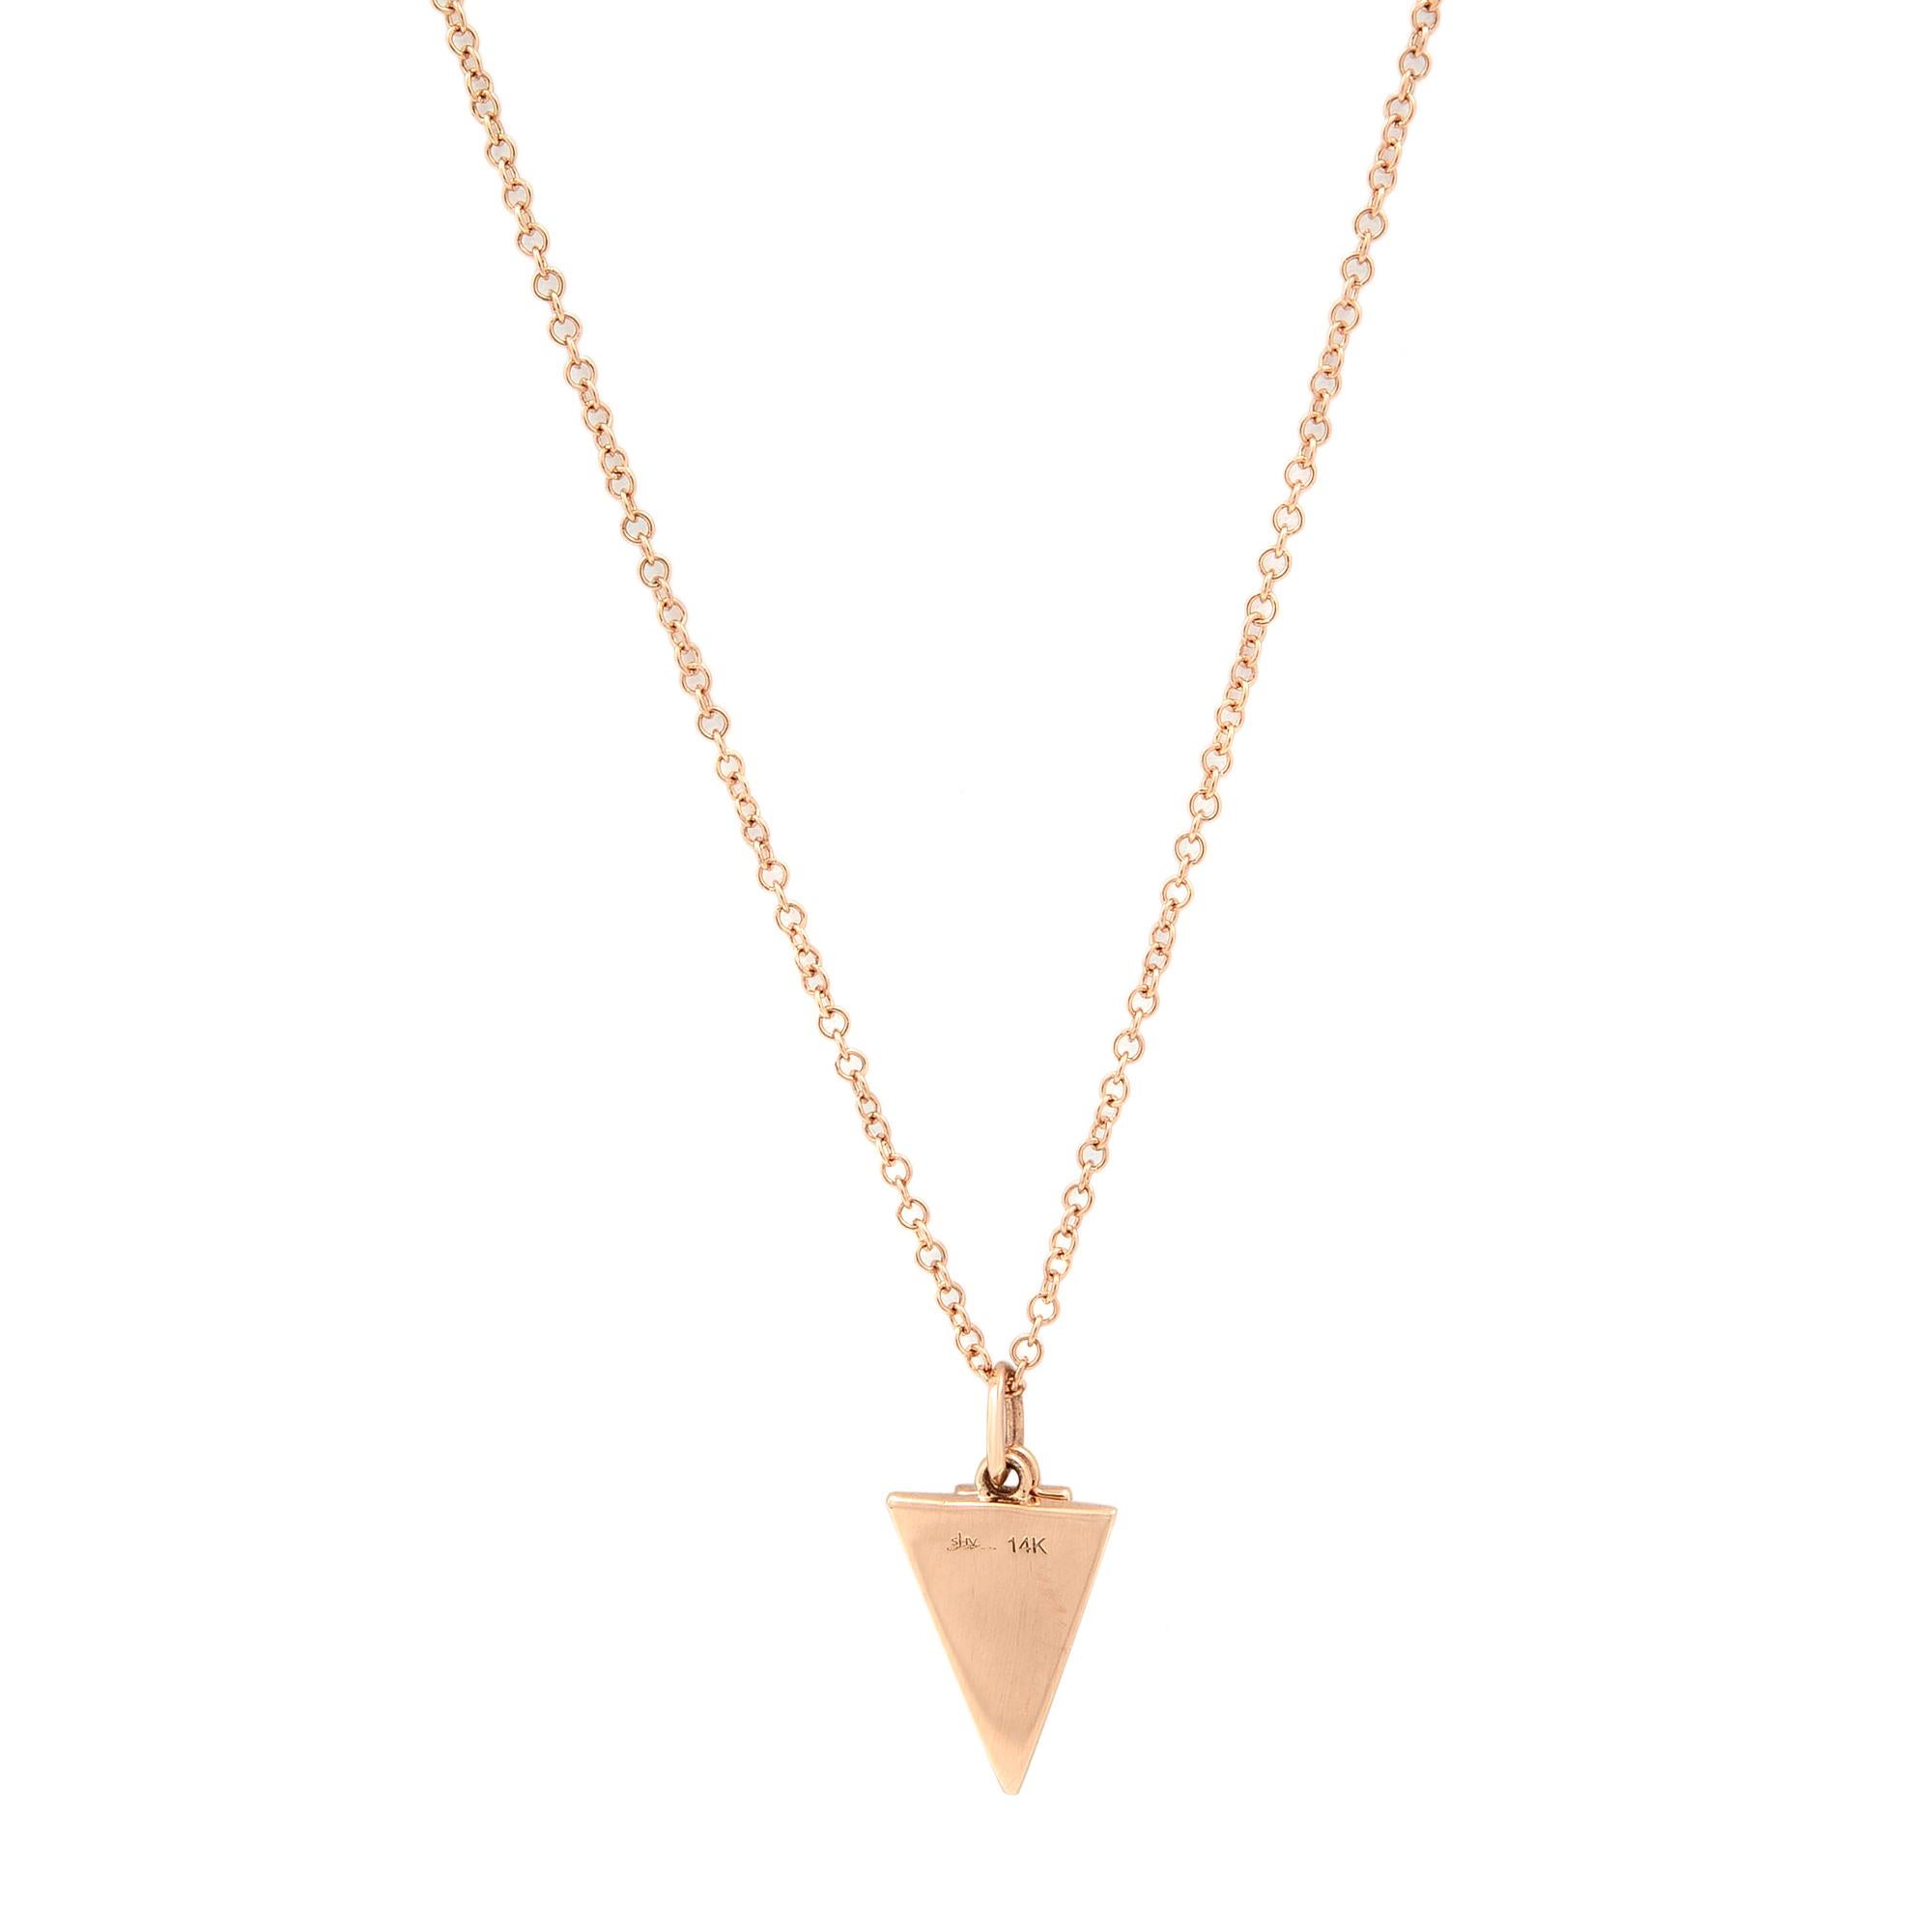 Rachel Koen Diamond Triangle Necklace 14K Rose Gold 0.03Cttw In New Condition For Sale In New York, NY